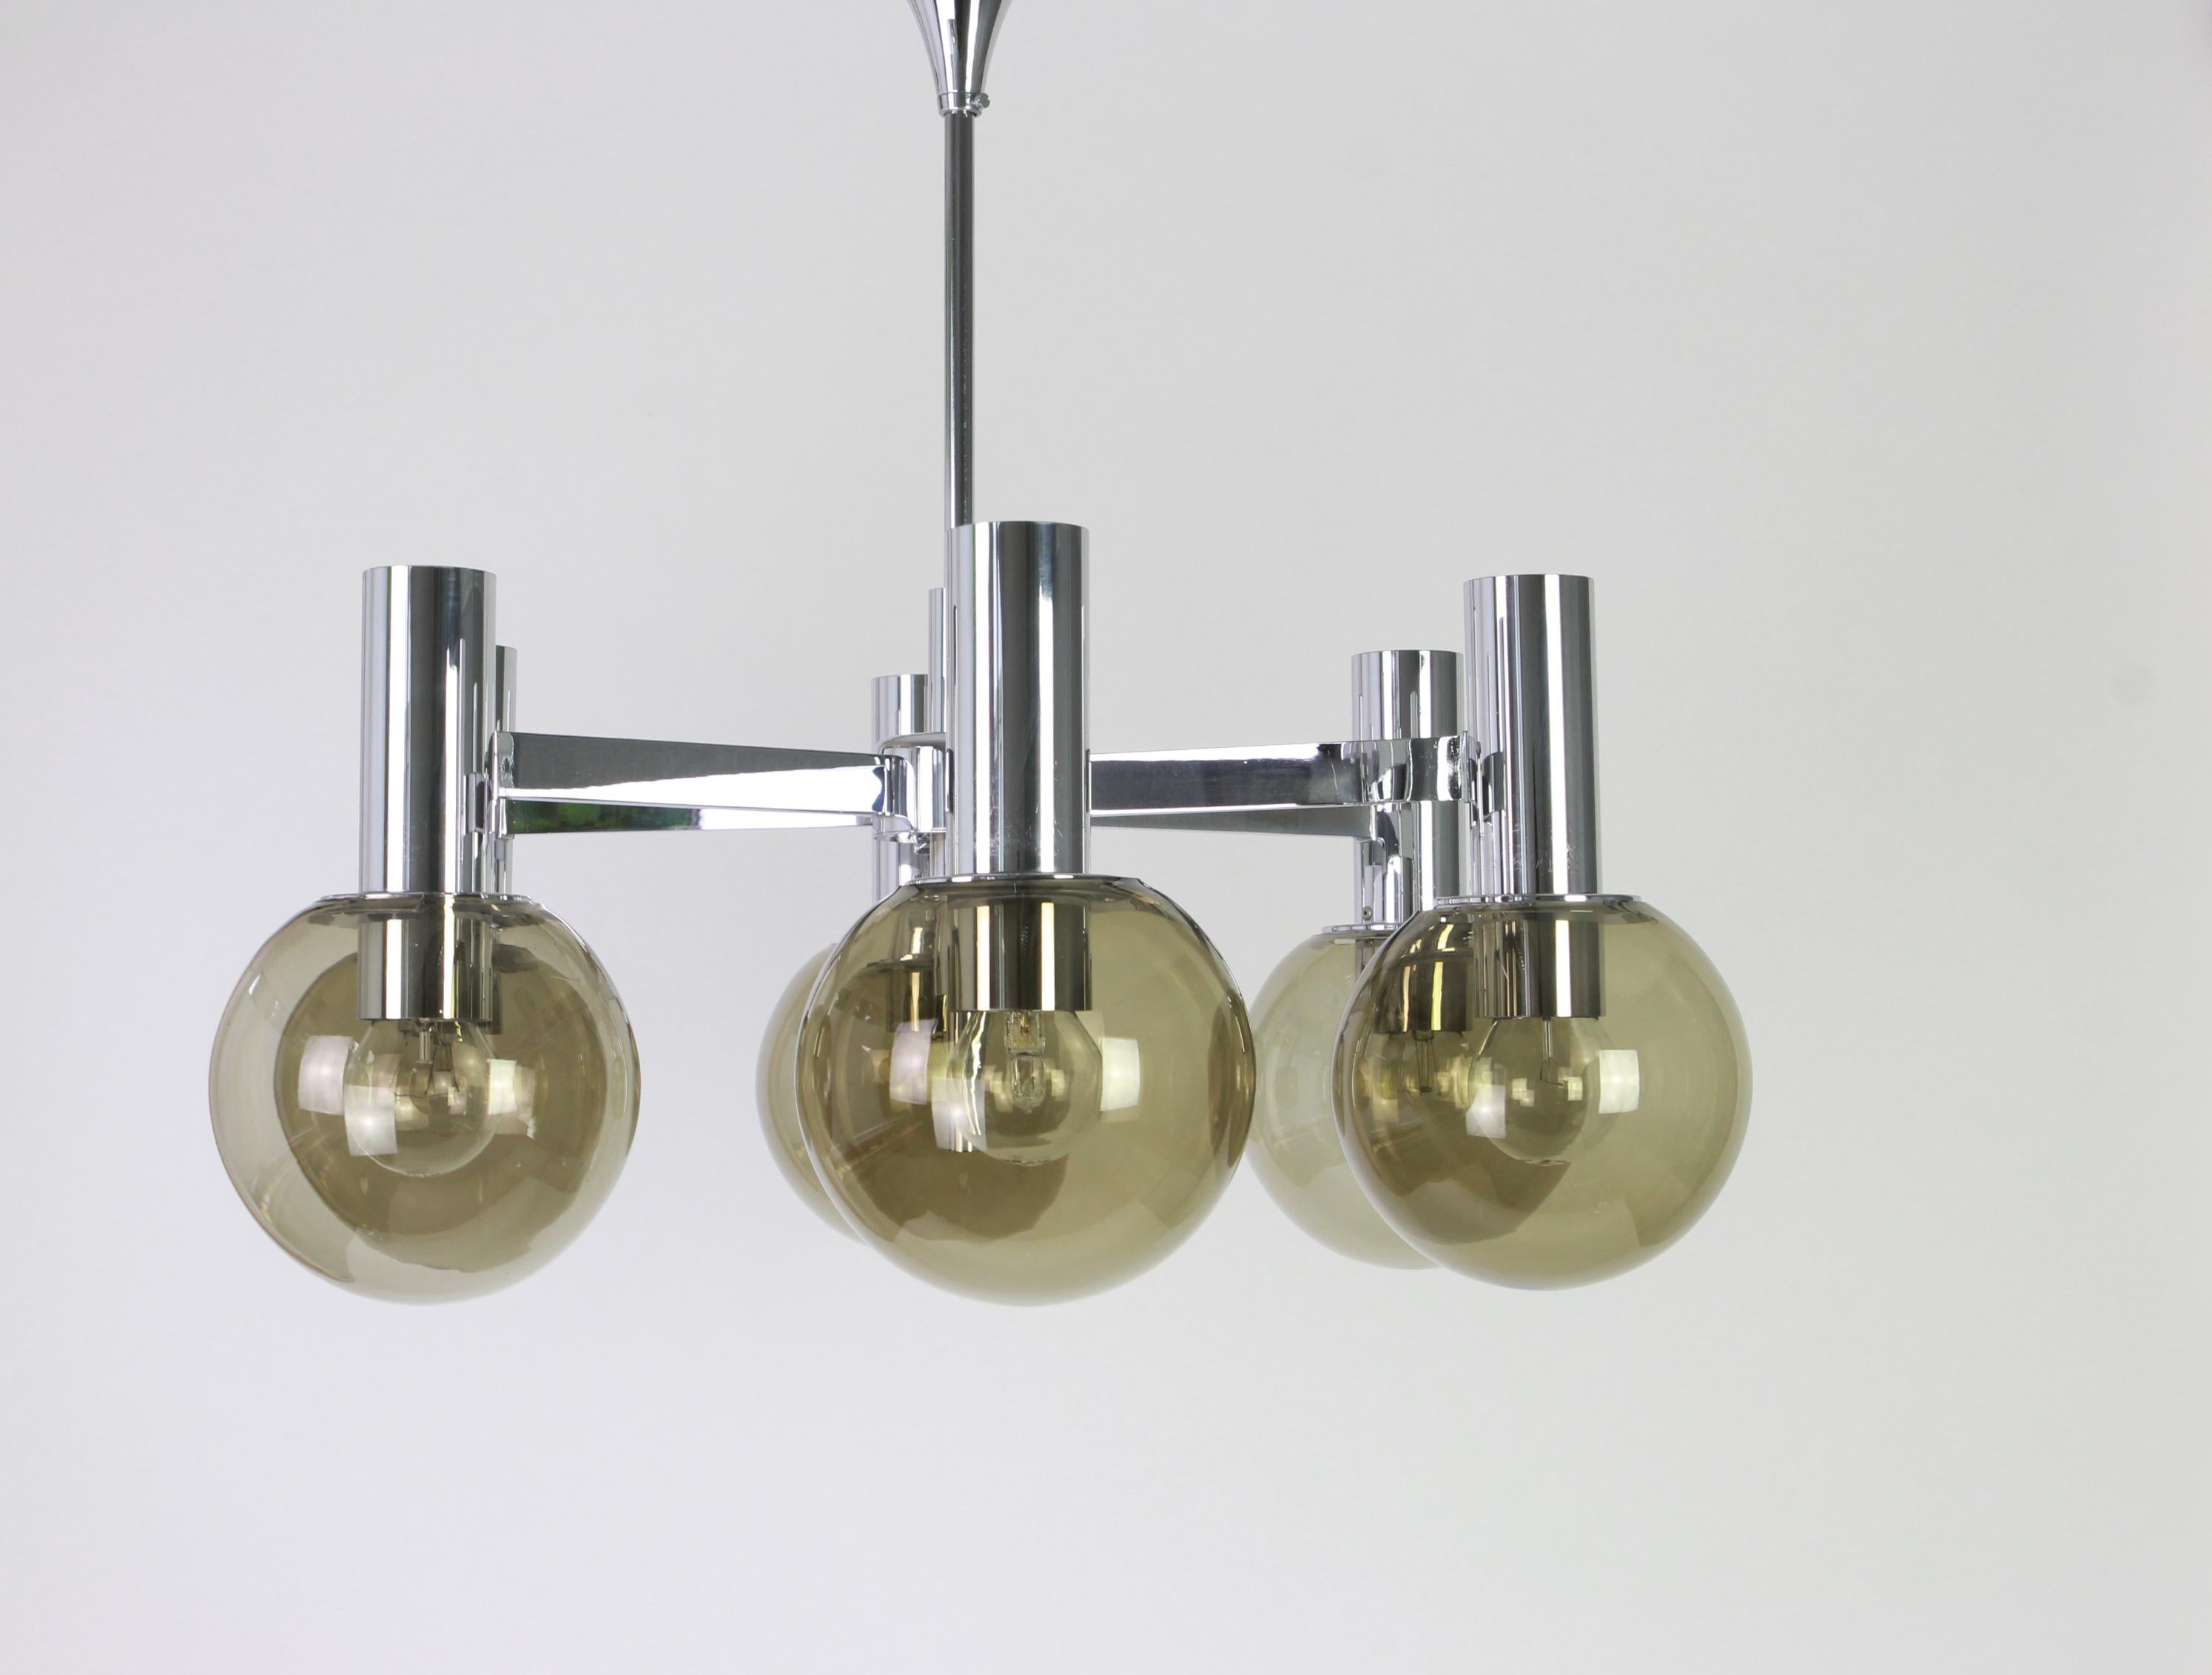 Six-light brass chandelier in the style of Sciolari.
Smoked glass in a very beautiful Smokey brown color with chrome frame, best of the 1960s.
High quality and in very good condition. Cleaned, well-wired and ready to use.

The fixture requires 6